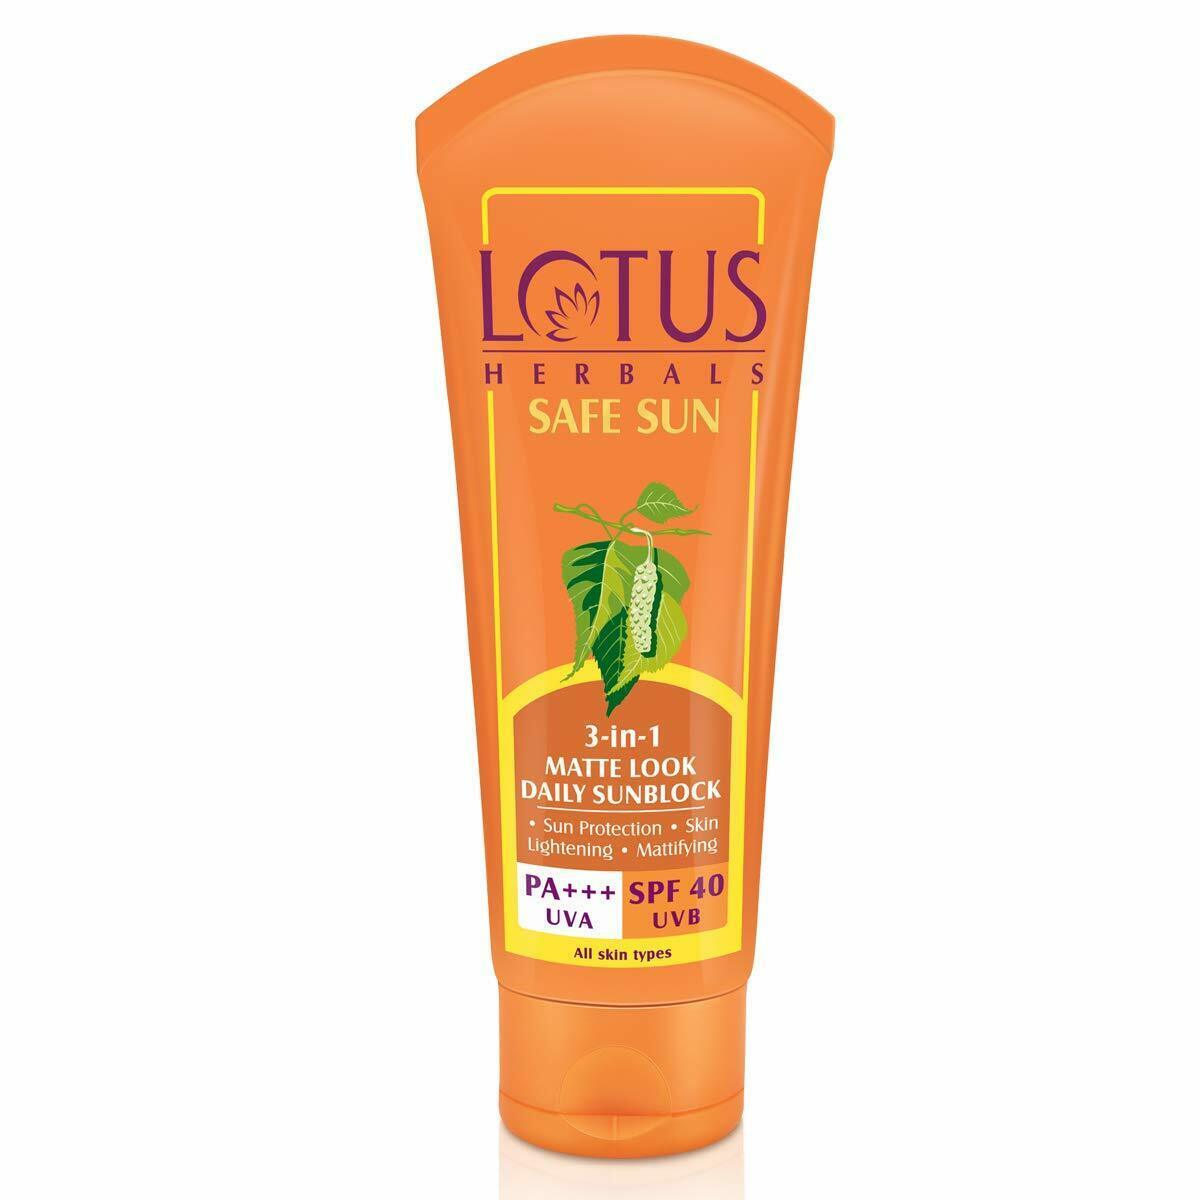 Lotus Herbals Safe Sun 3-in-1 Matte Look Tinted Sunscreen SPF 40 PA+++, 50g